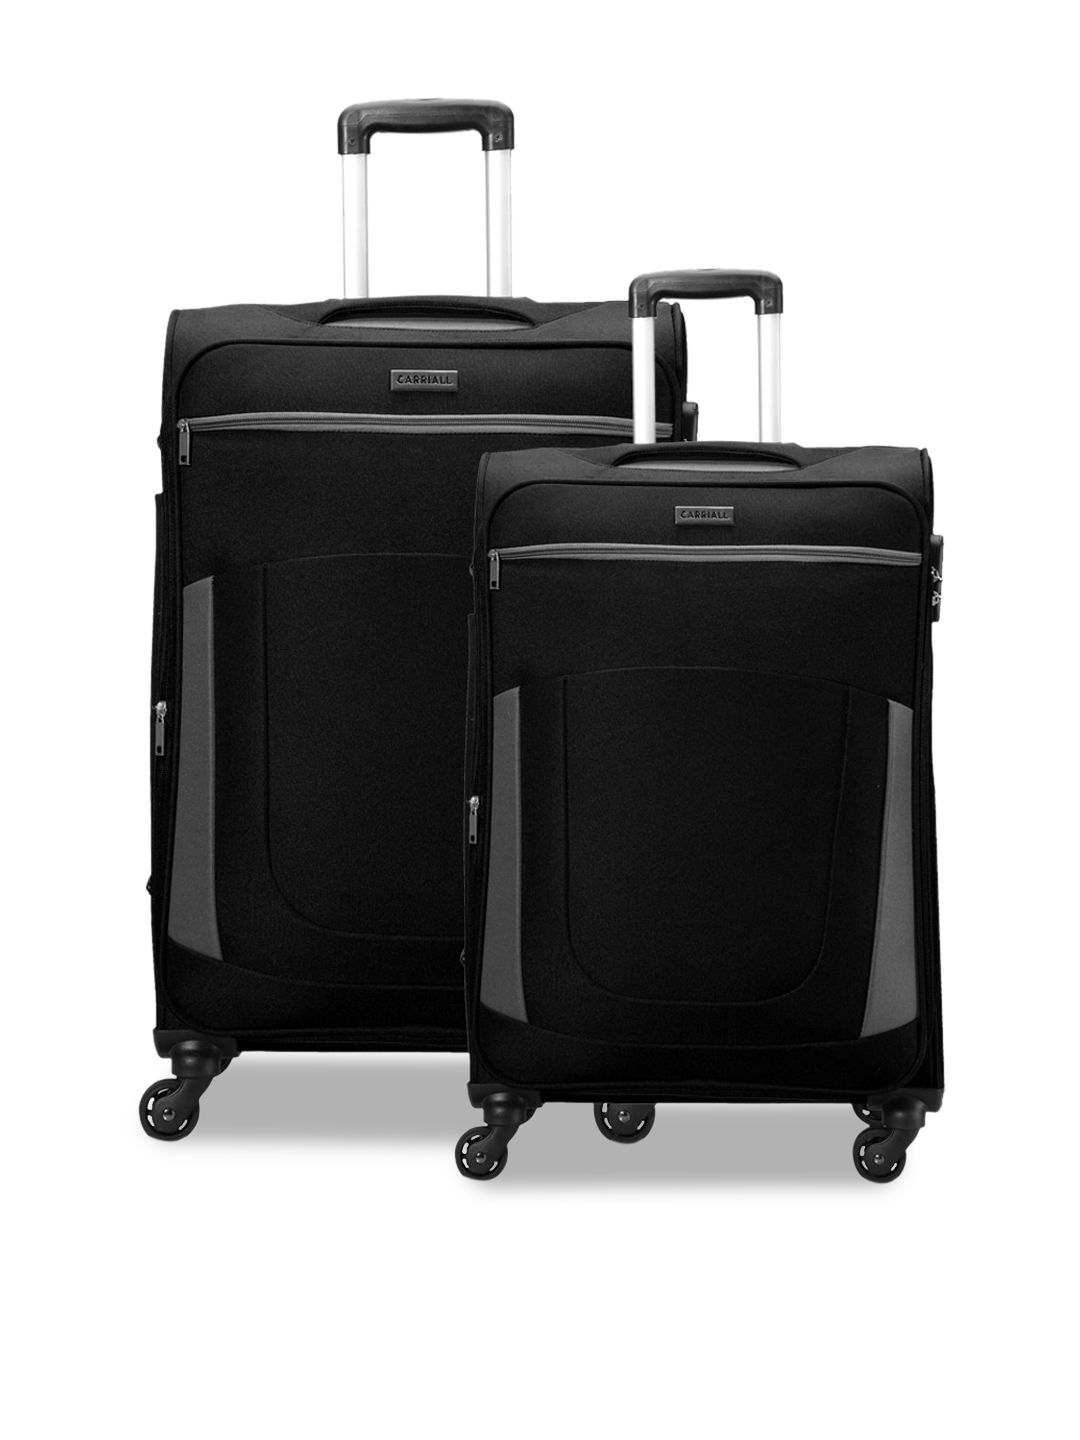 CARRIALL Set Of 2 Black Solid Soft-Sided Trolley Suitcases Price in India